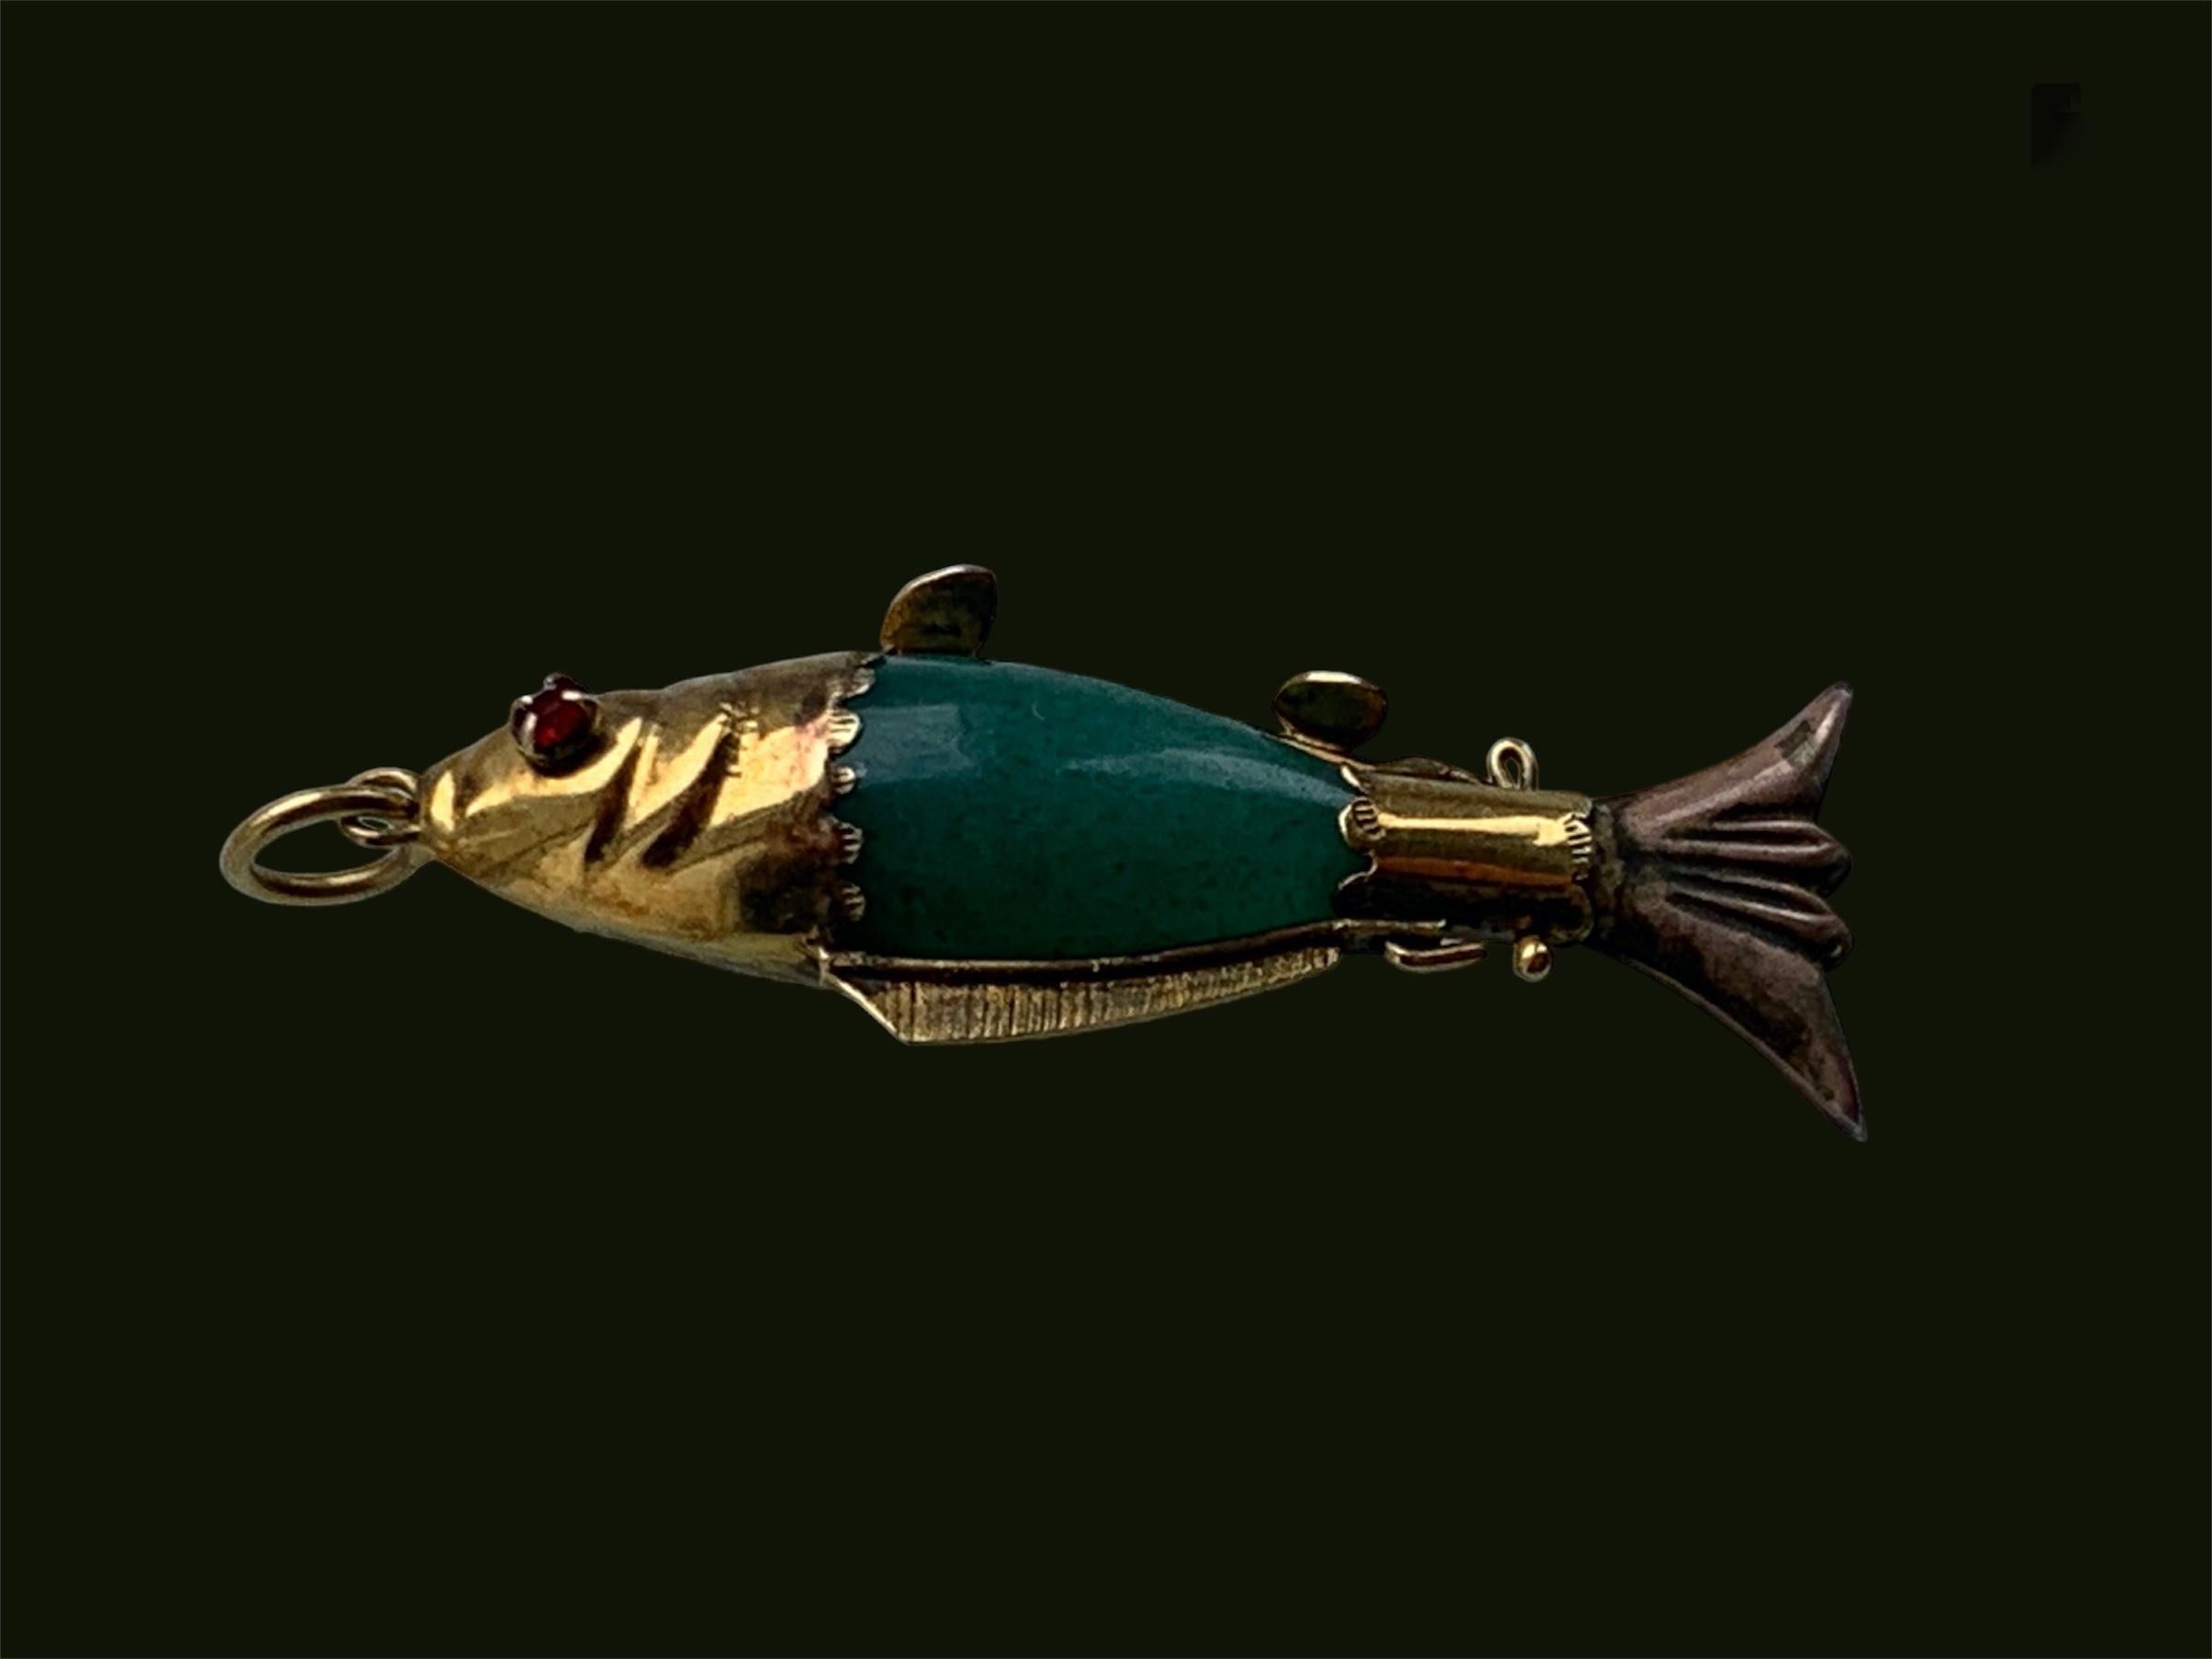 Beautiful Antique Rare
Novelty Fish
main body is Aventurine semi - precious stone 
and the remaining Head, Fins , tail & jump ring are 14ct Gold 
The fish is stamped 14k on the Gold..
Overall weight 3.76 grams
Est.Gold weight present  1.2 grams.
Red